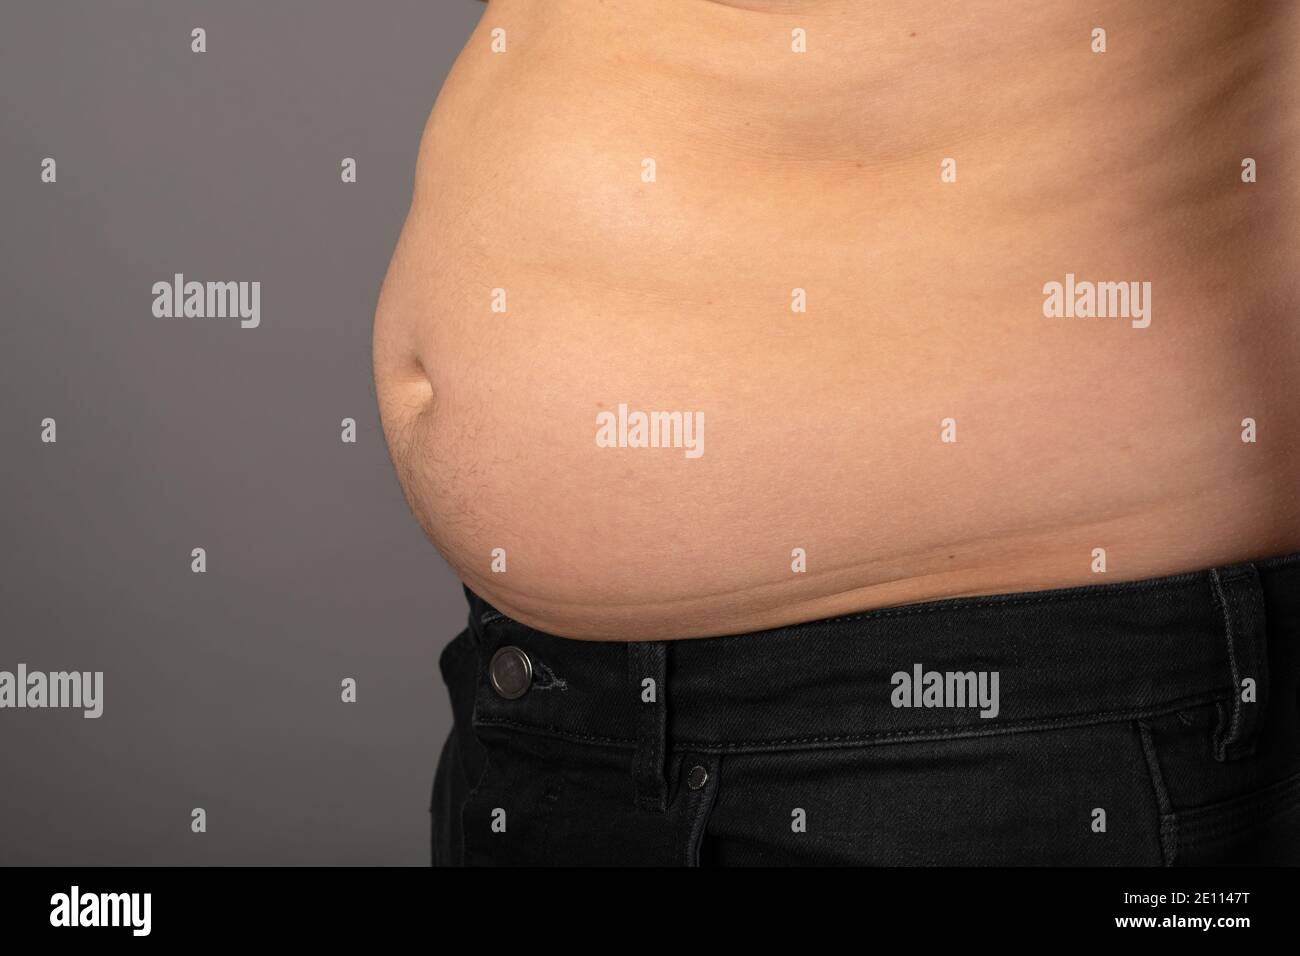 Close up picture of young man's bloated stomach in front of grey background Stock Photo